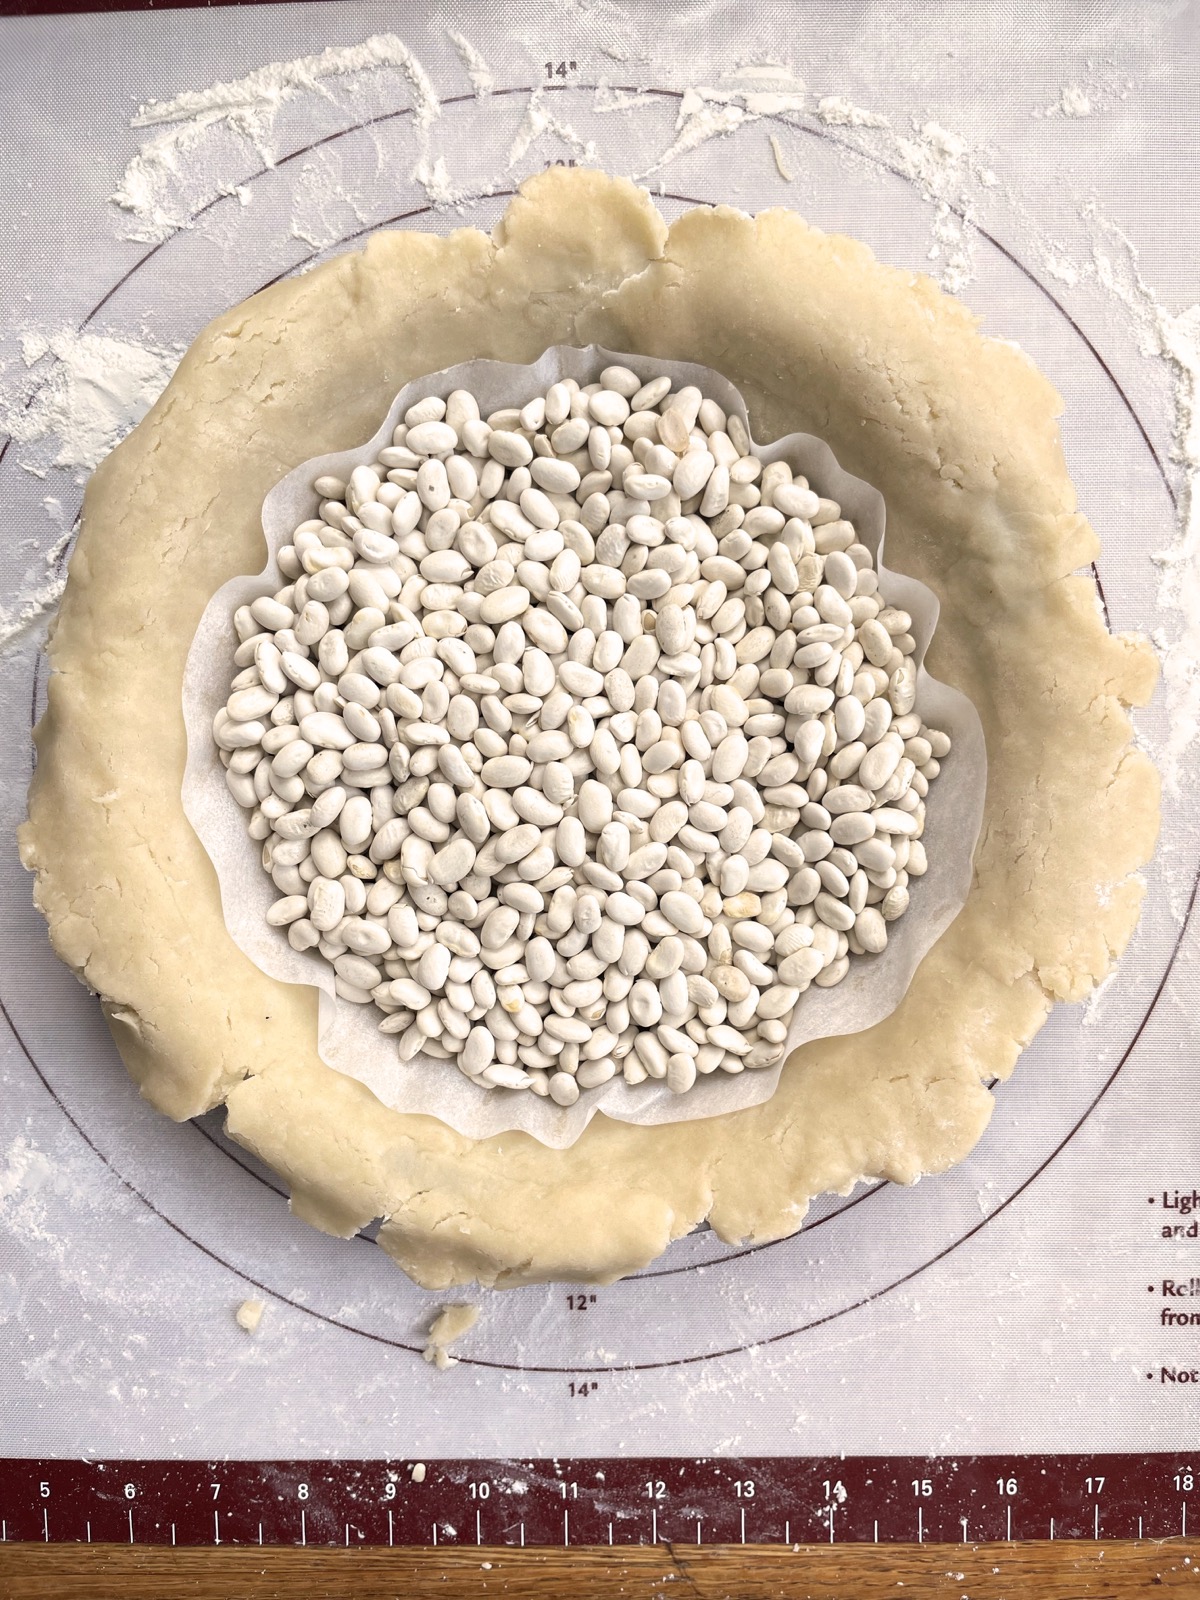 Pie crust in a pan layered with a parchment circle and dried beans, ready to prebake.